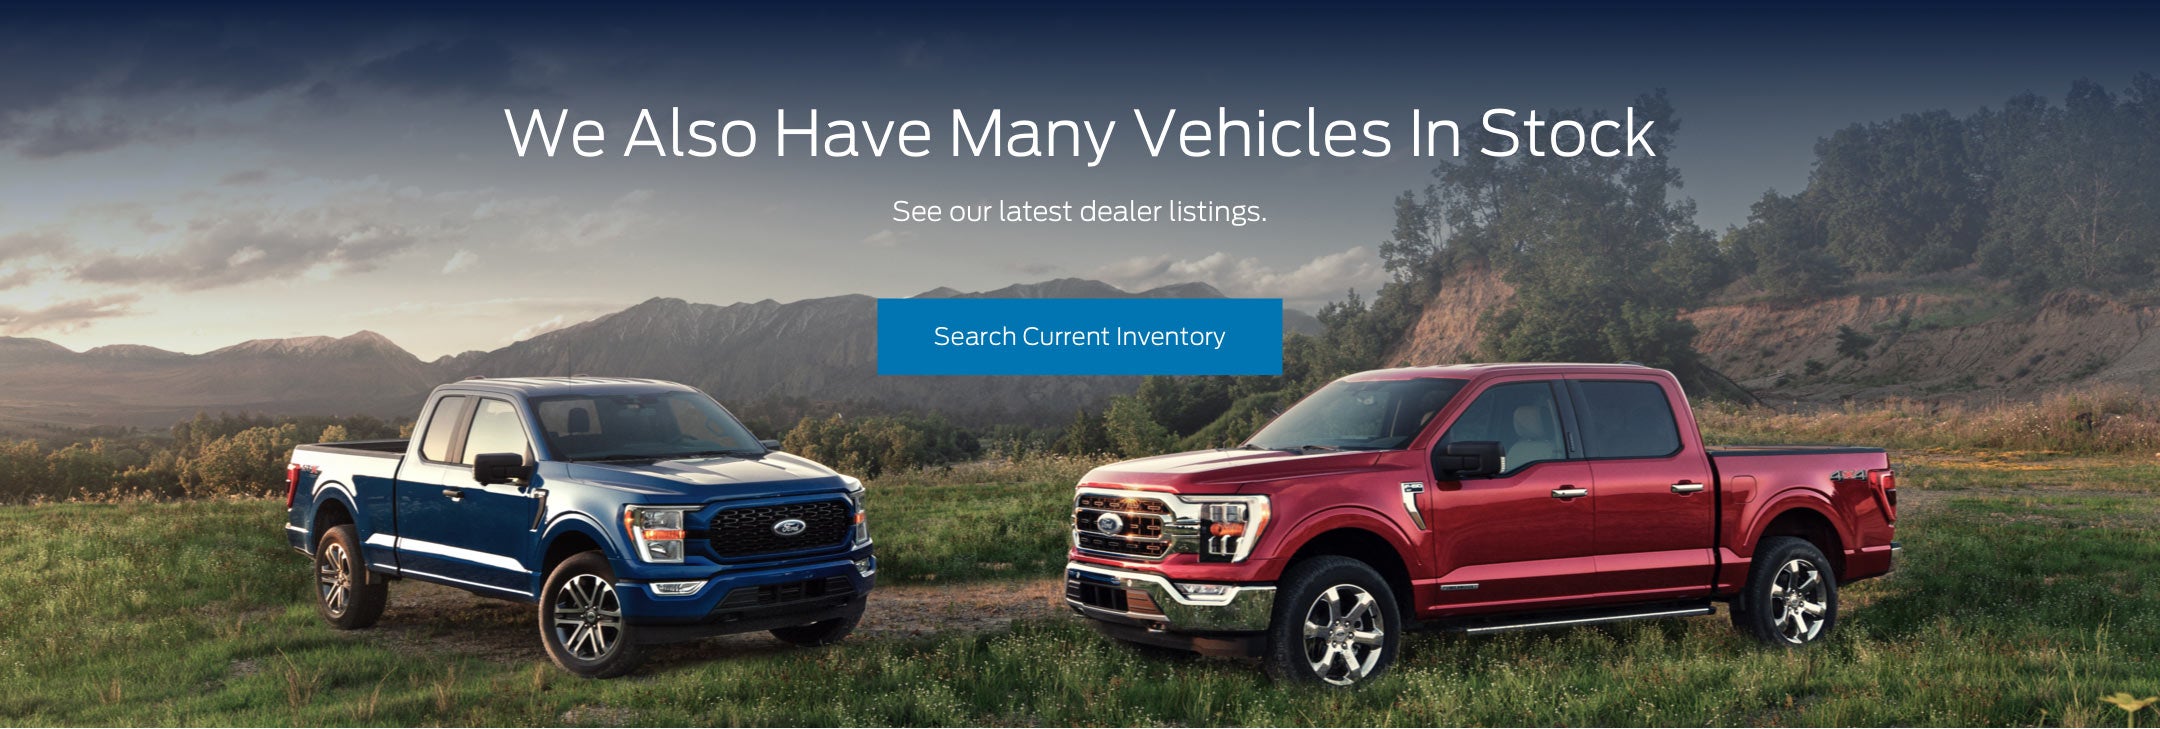 Ford vehicles in stock | Arrow Ford in Abilene TX